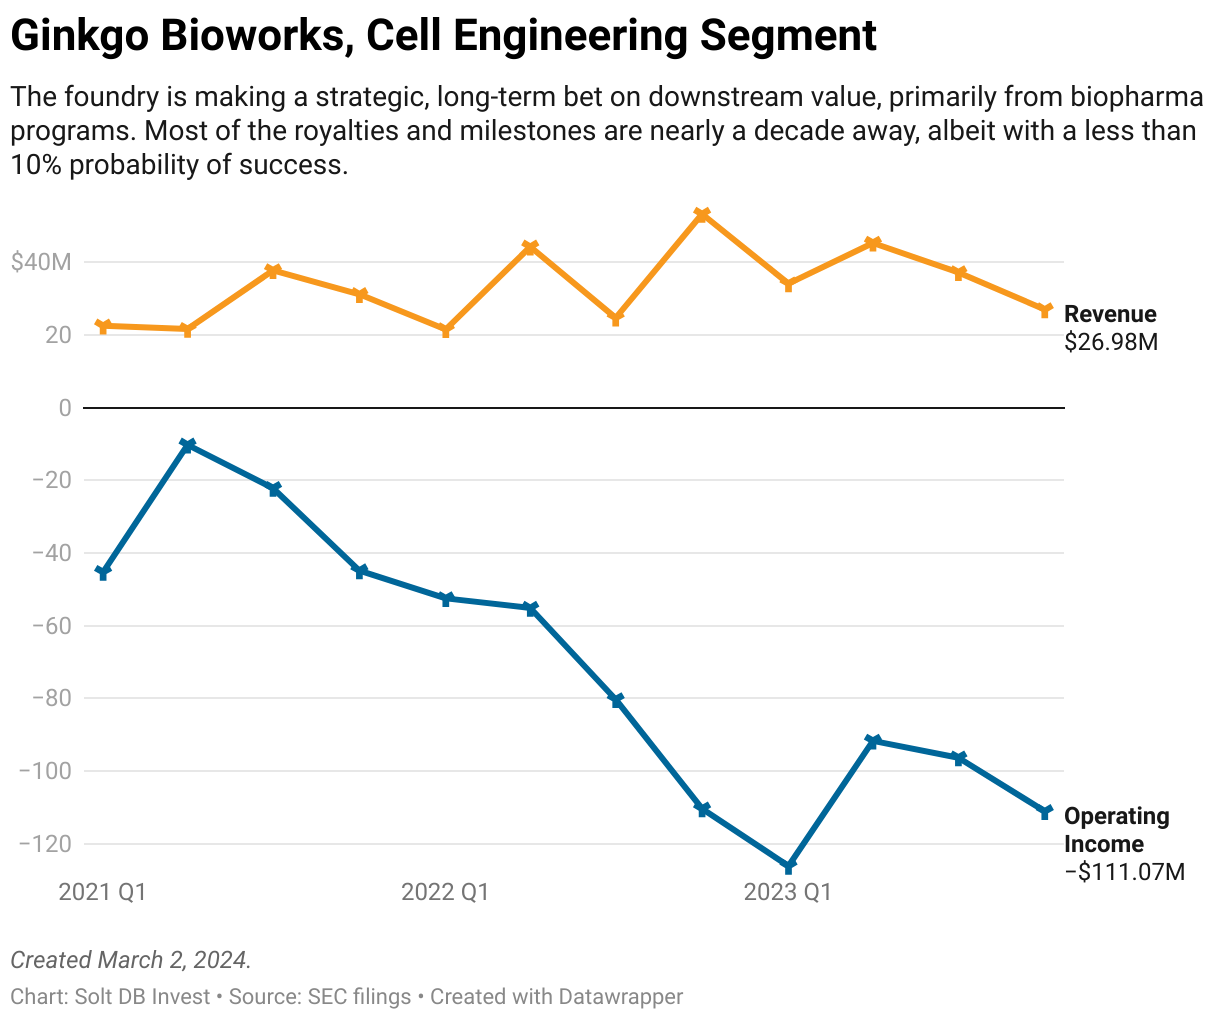 A chart showing the quarterly revenue and operating income of the Cell Engineering segment of Ginkgo Bioworks from the first quarter of 2021 through the fourth quarter of 2023.